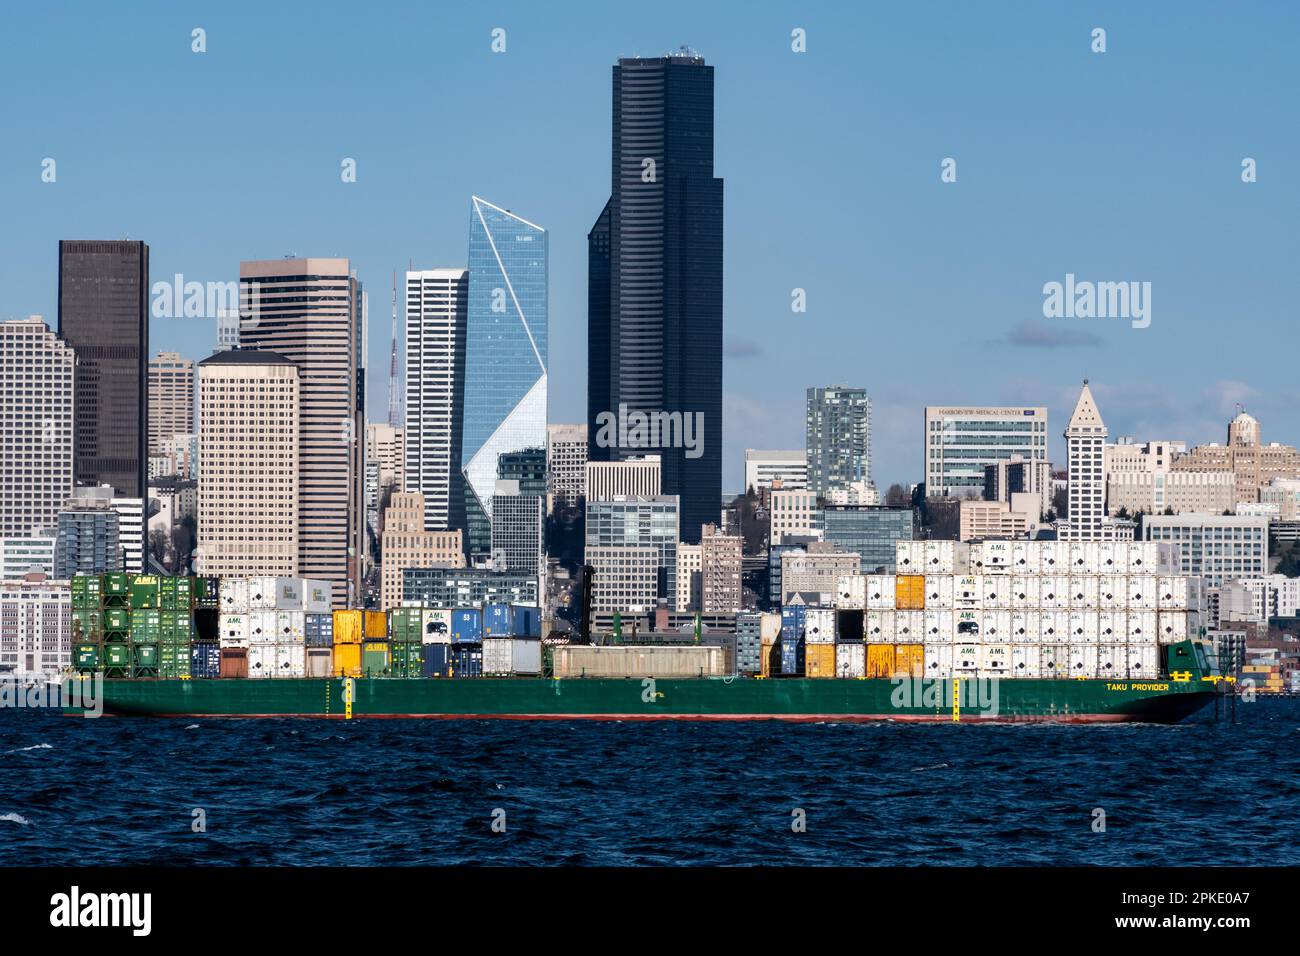 A container ship passes along the water in front of the Seattle downtown landscape on a clear sunny day Stock Photo